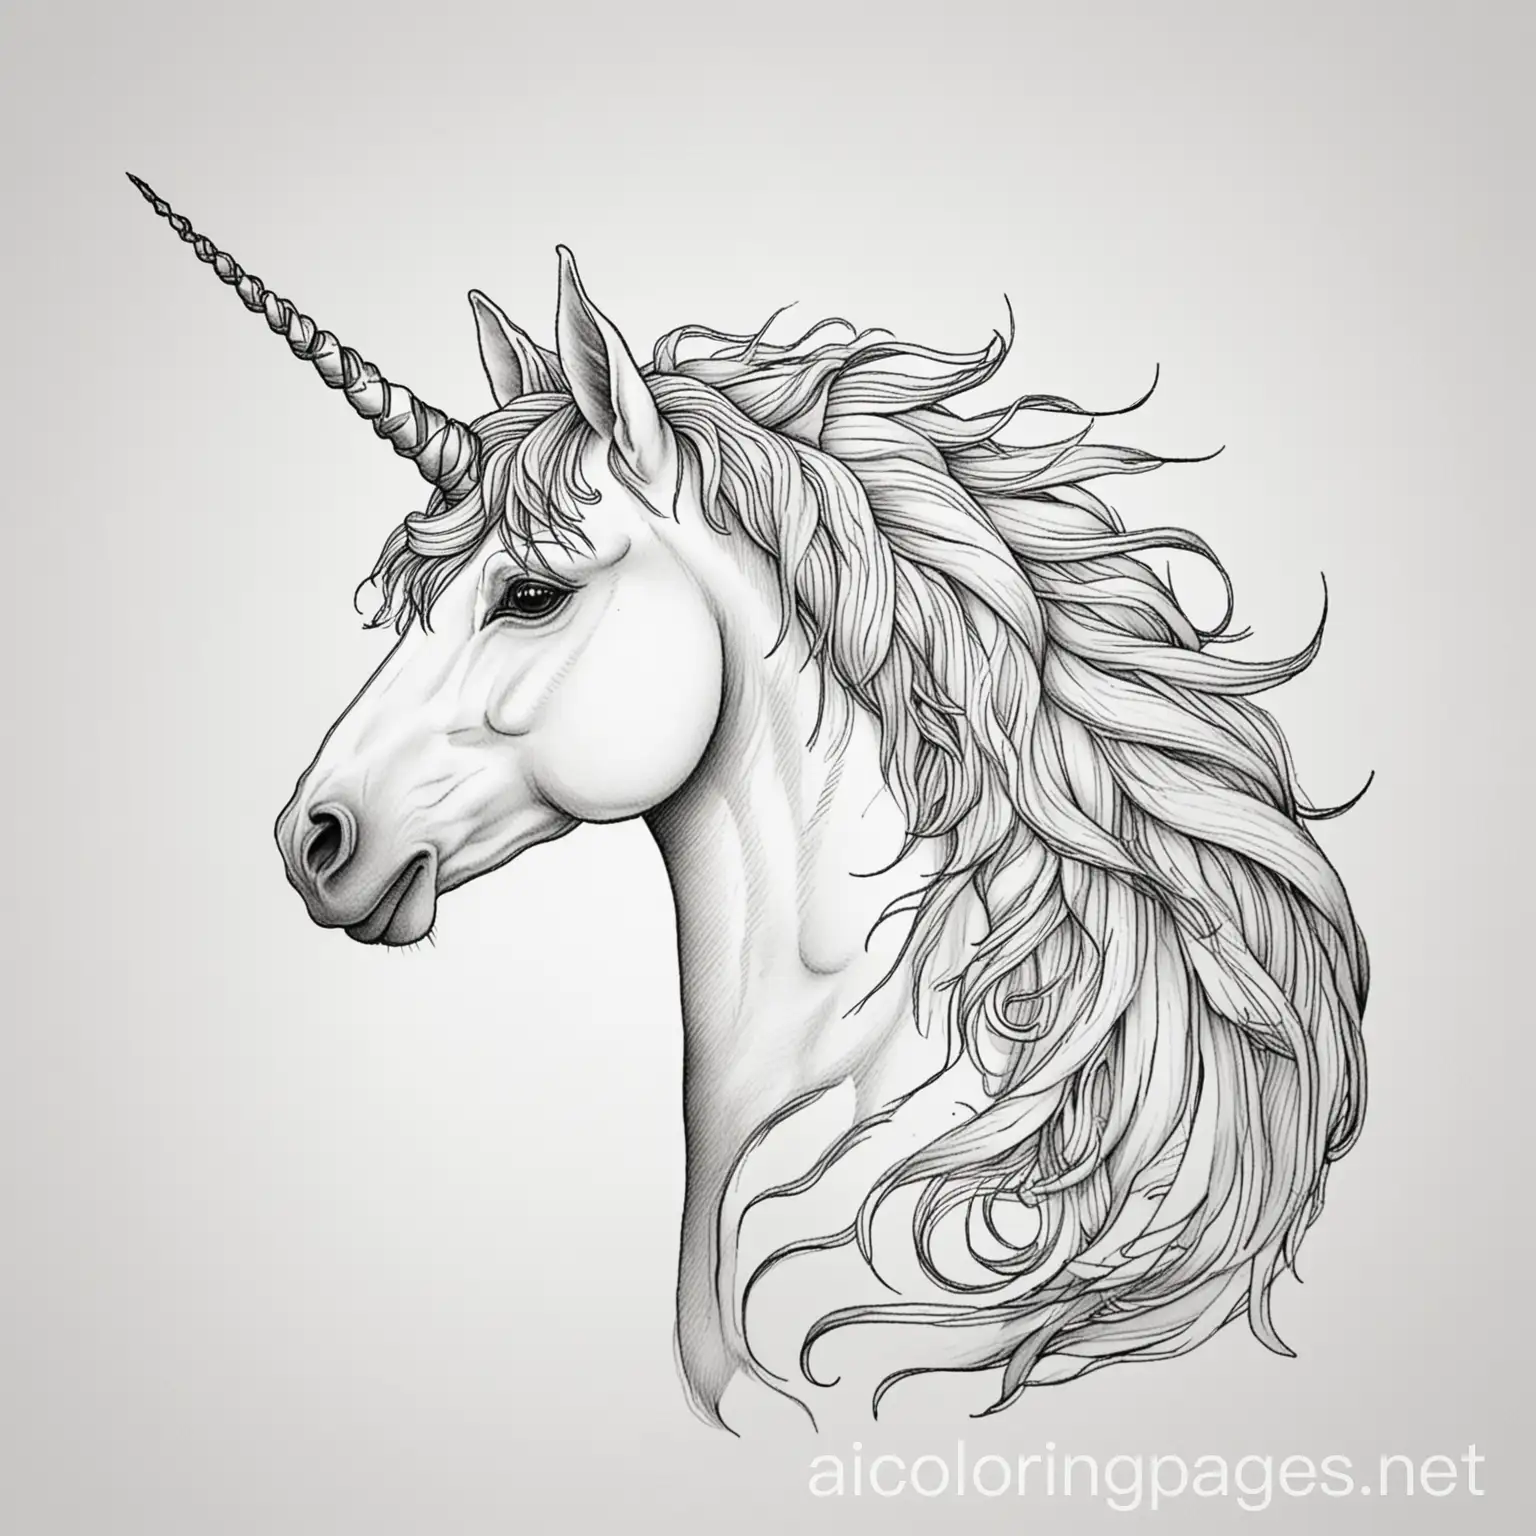 Unicorn, Coloring Page, black and white, line art, white background, Simplicity, Ample White Space